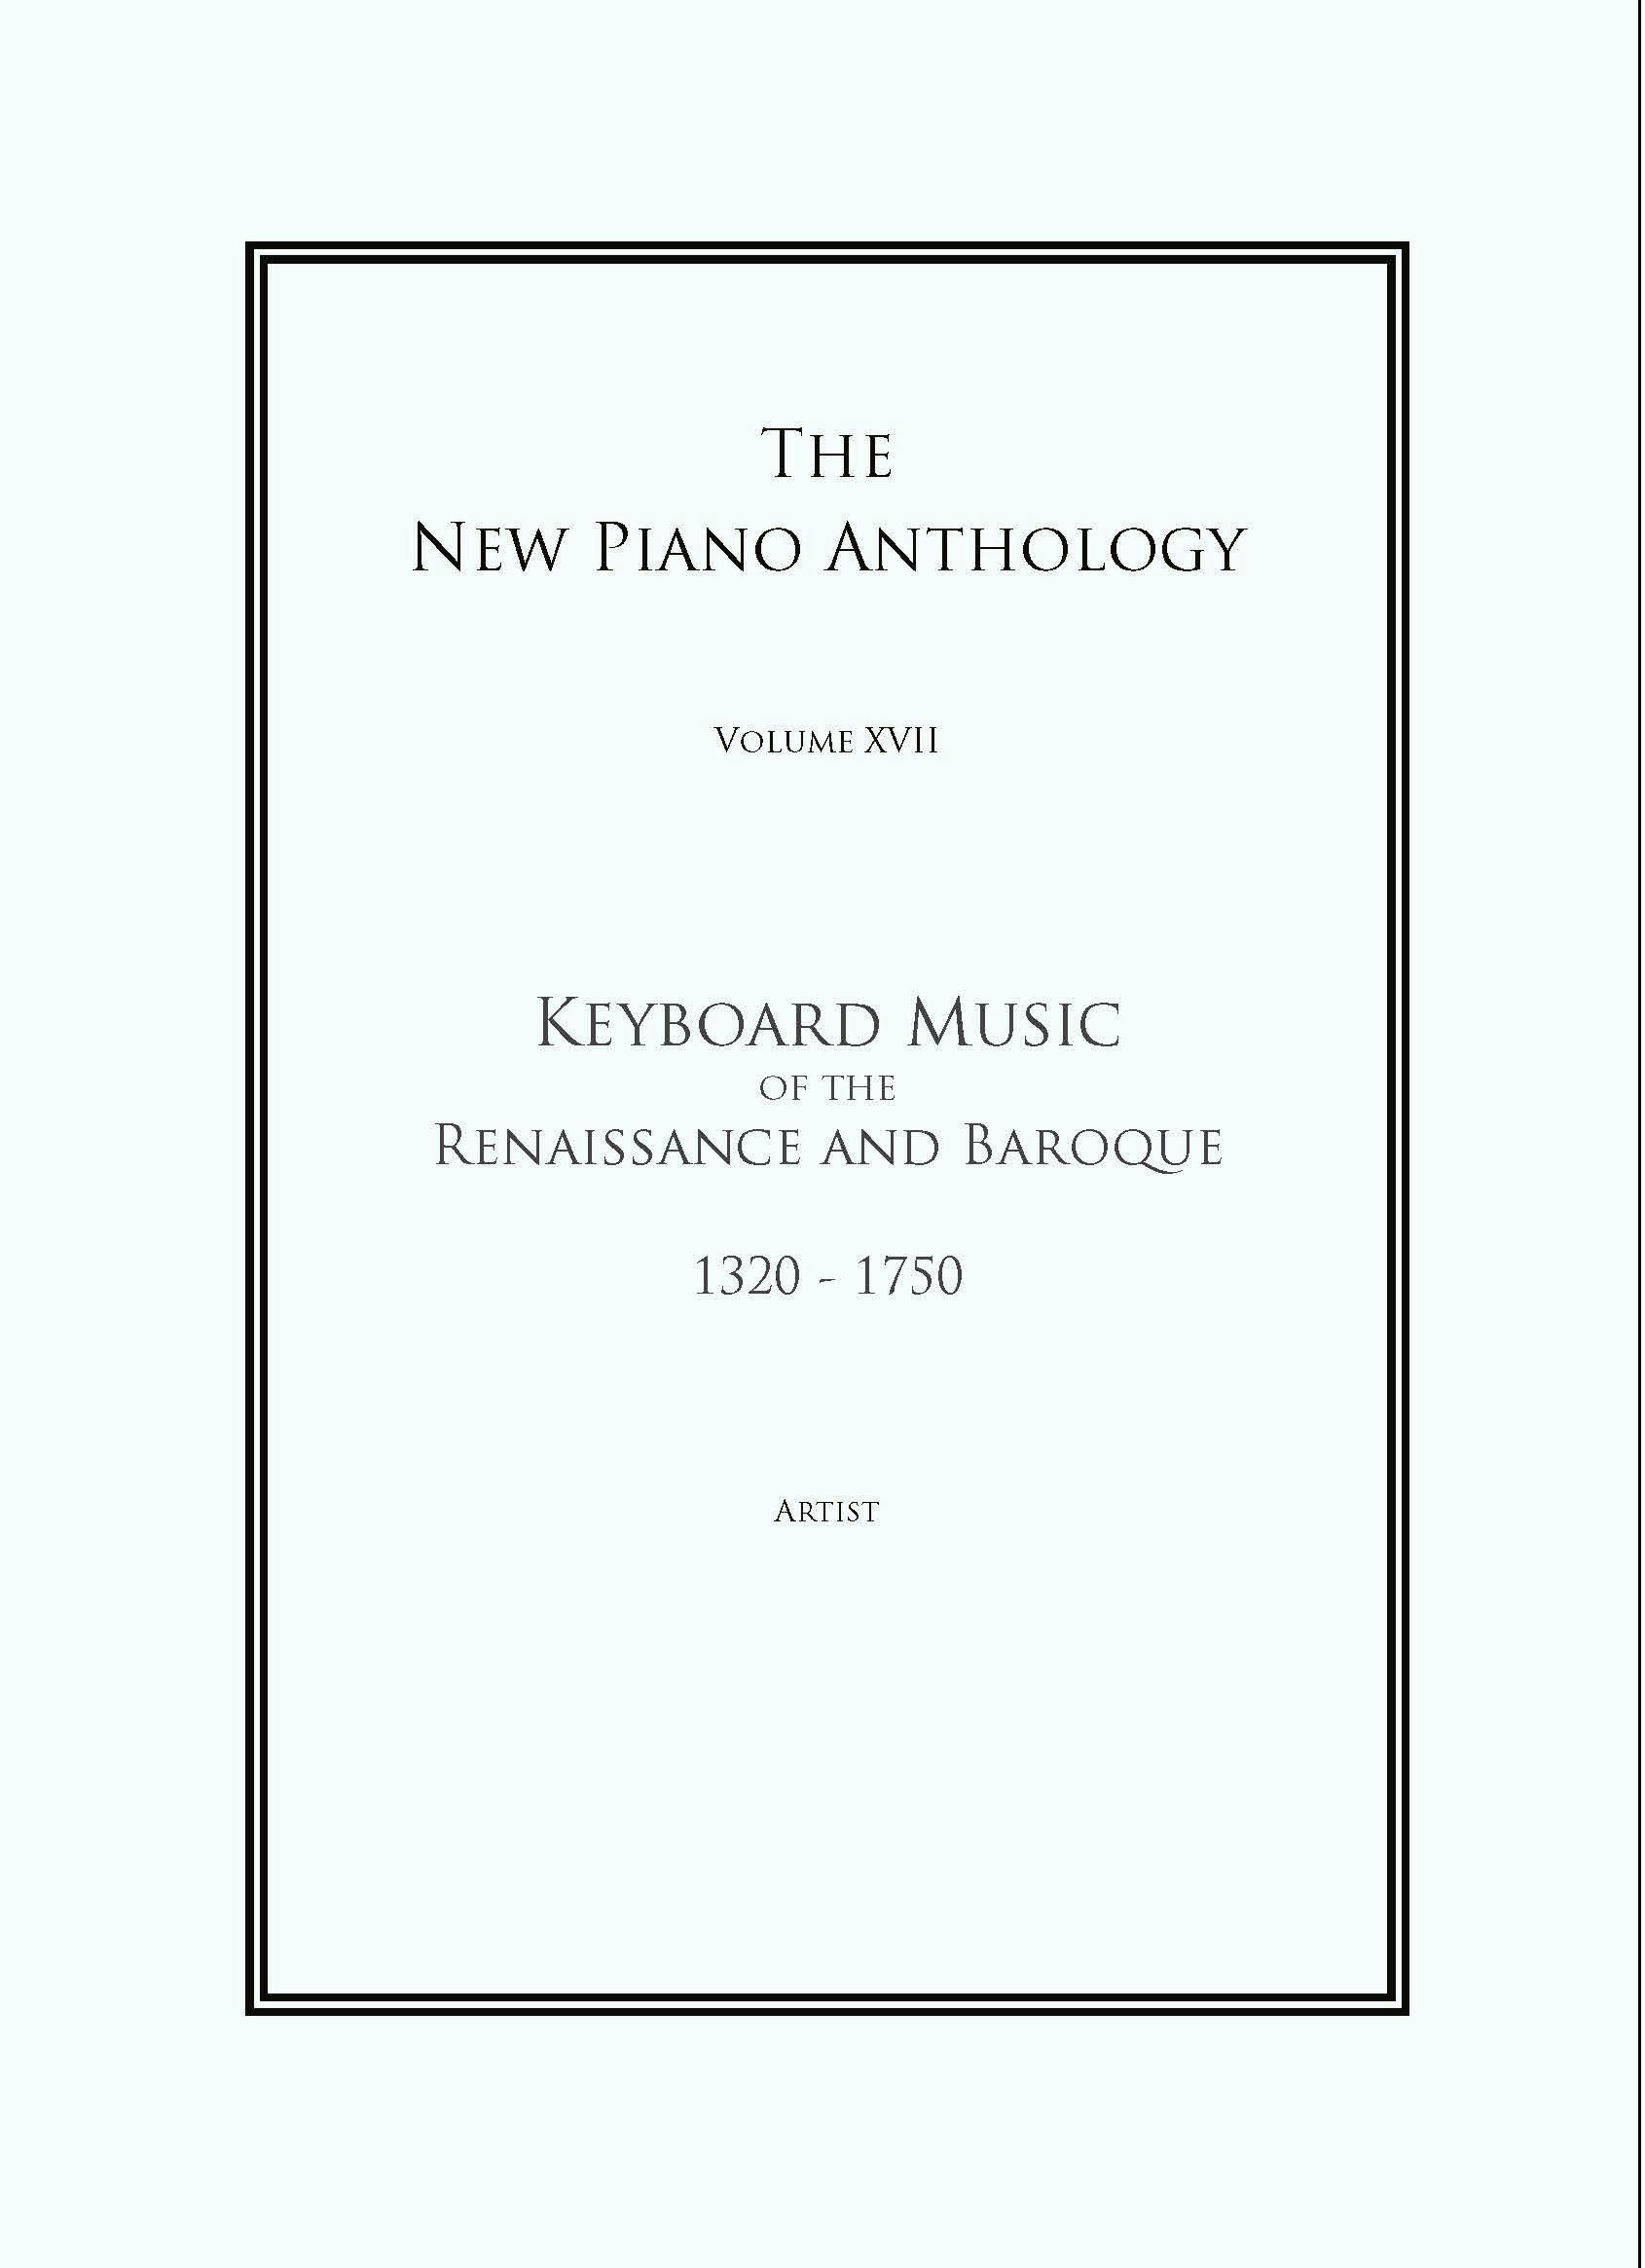 Keyboard Music of the Renaissance and Baroque (Artist)